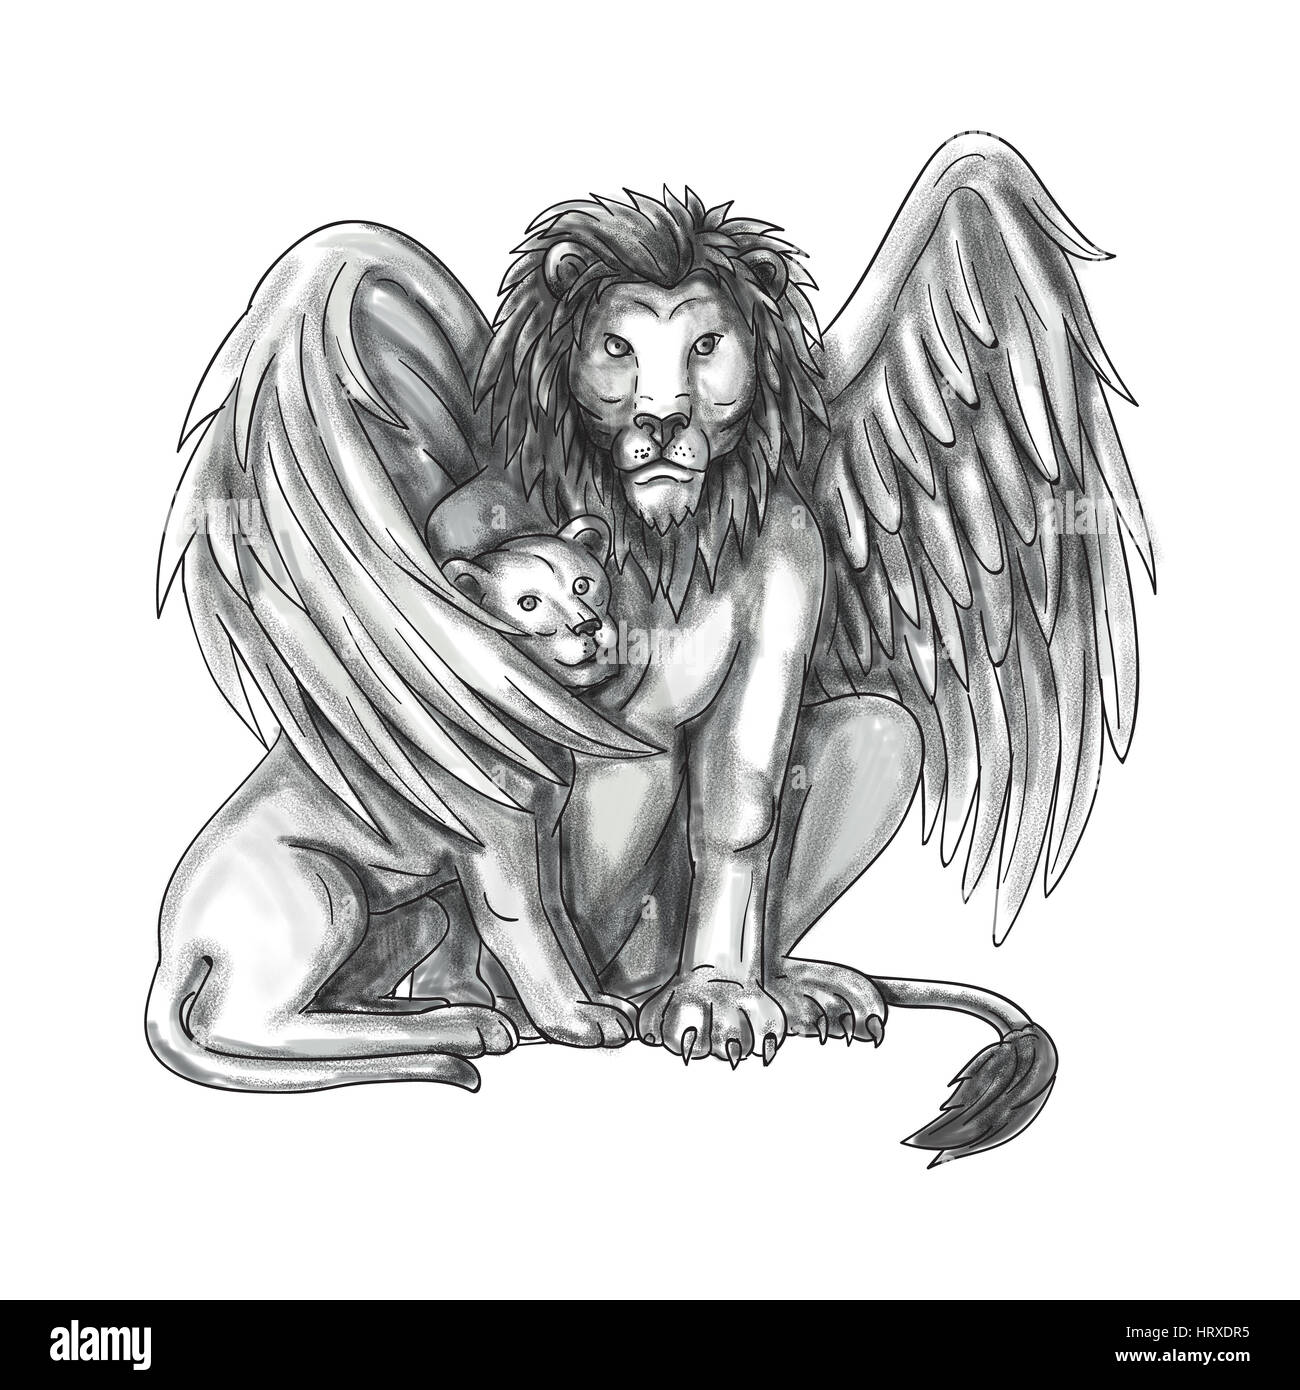 Tattoo style illustration of a winged lion, a mythological creature that resembles a lion with bird-like wings, protecting its cub by putting it under Stock Photo